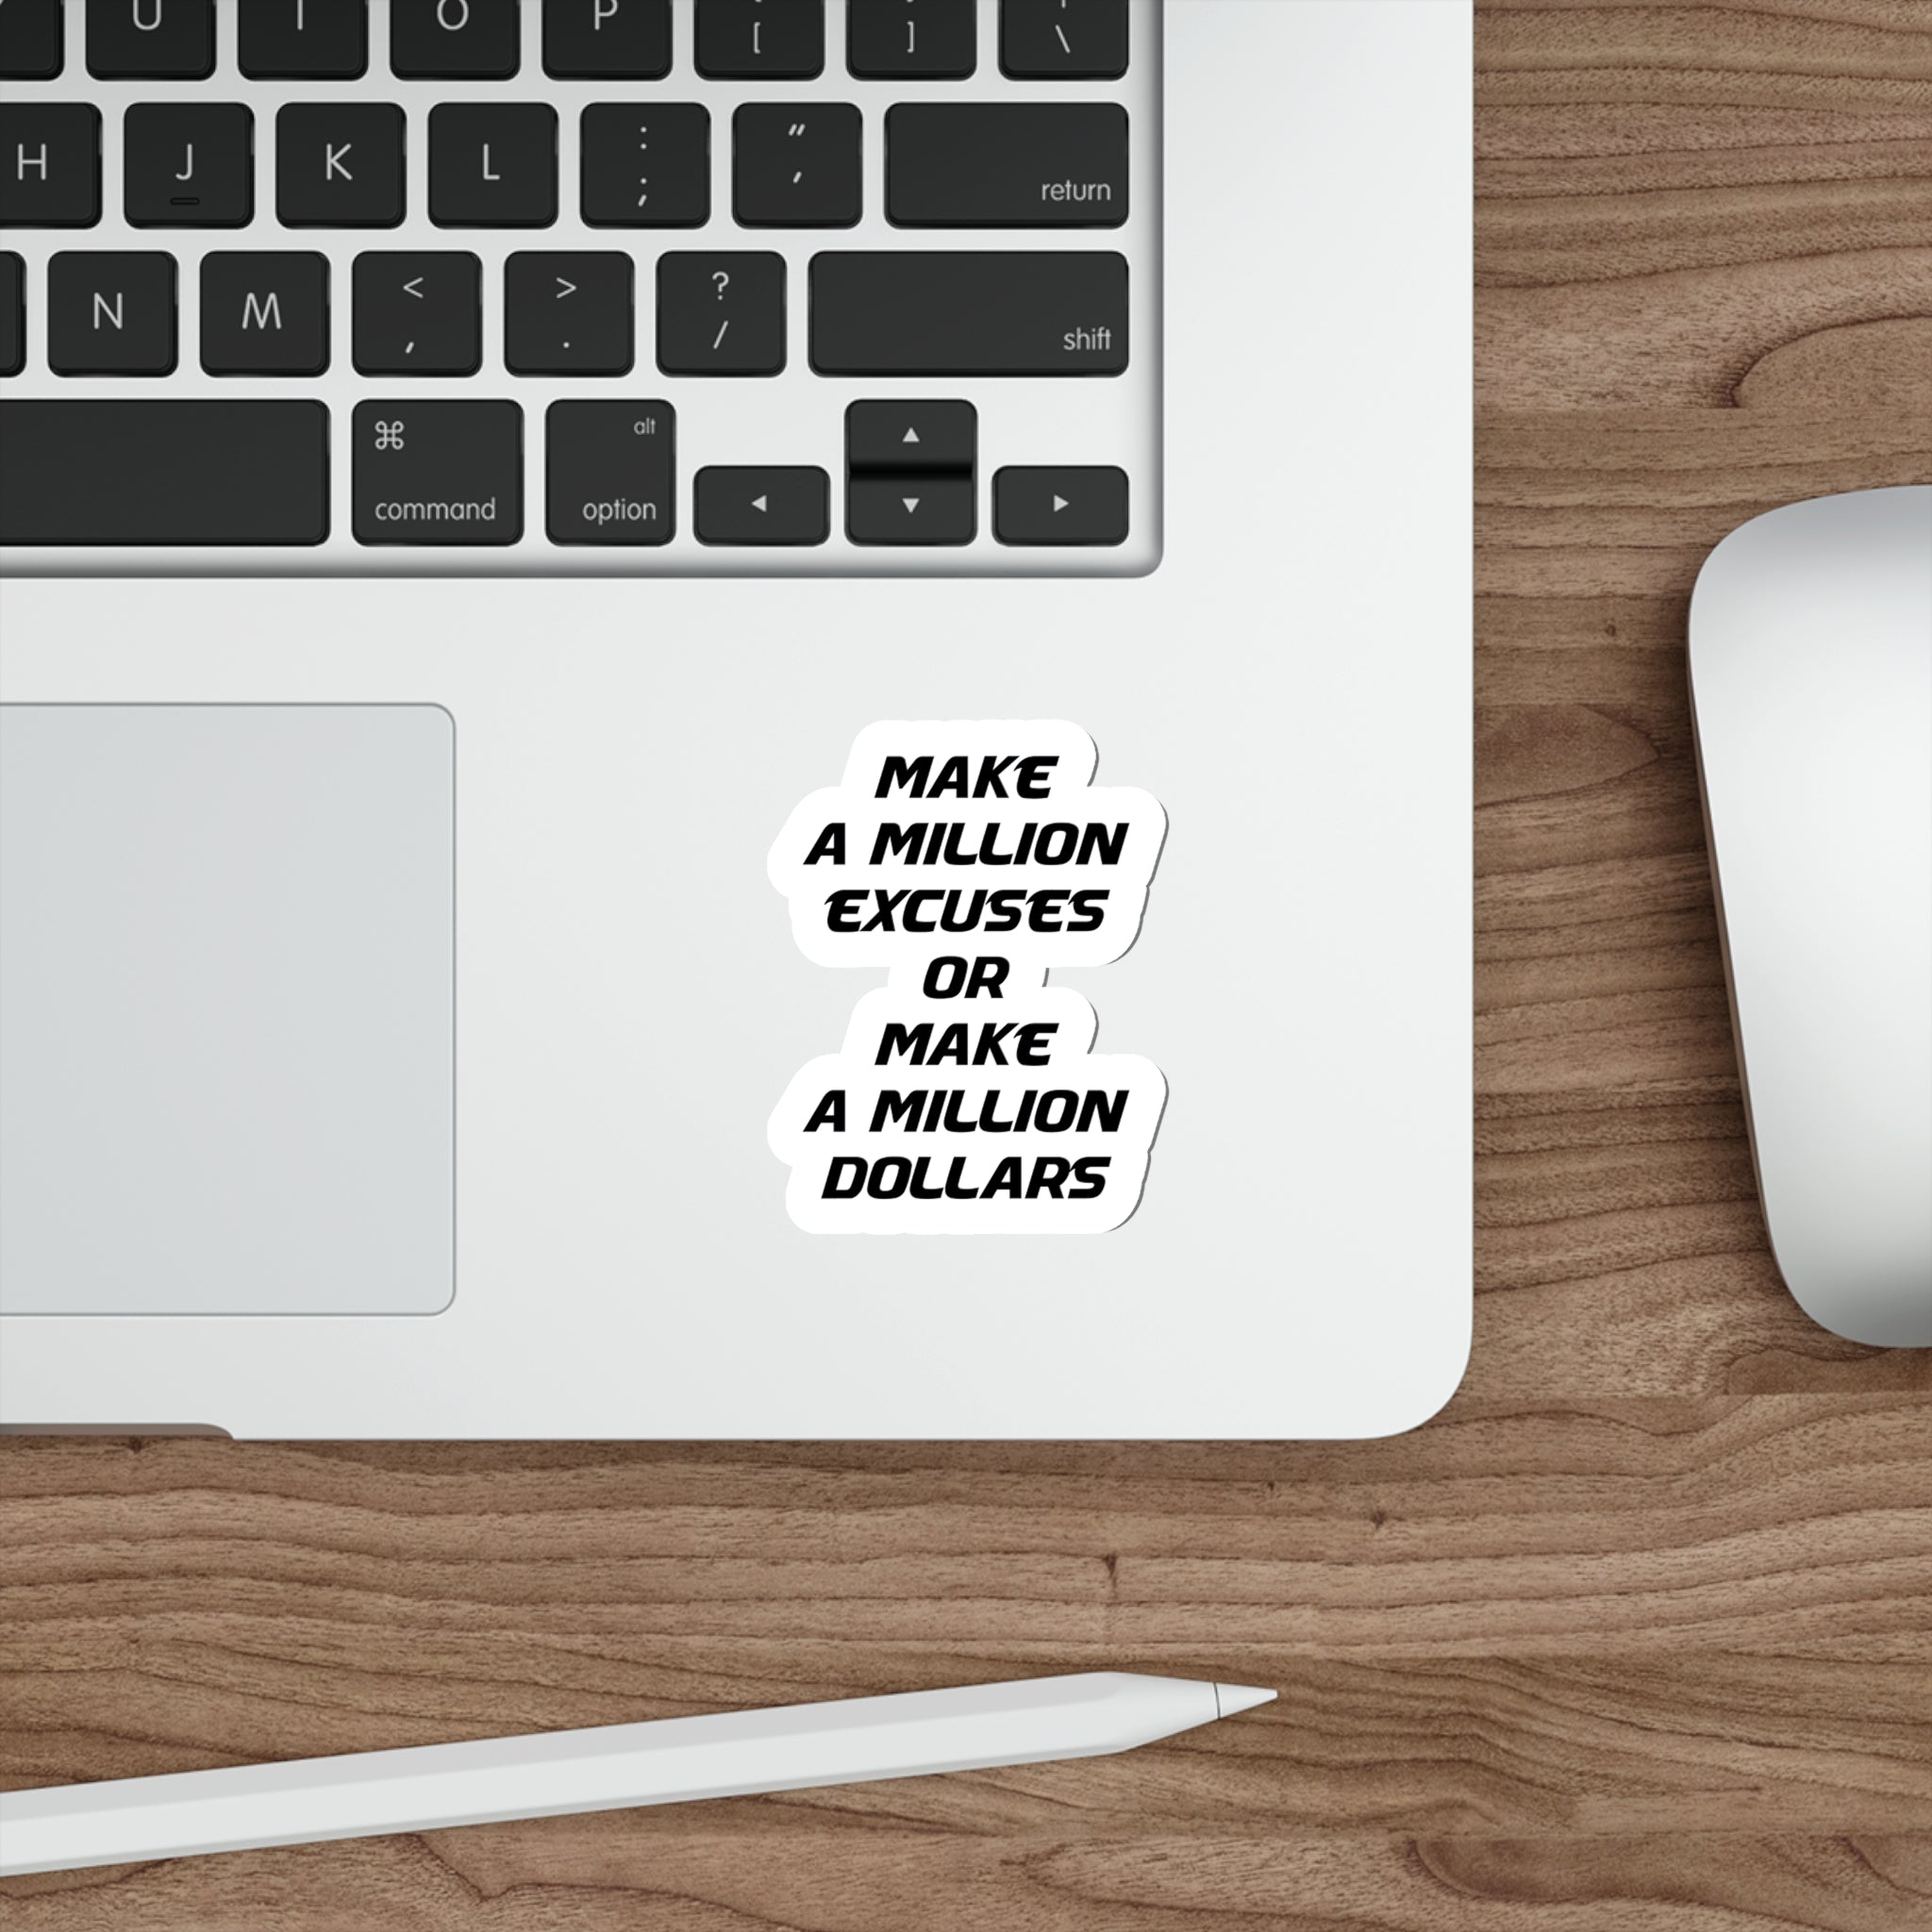 Make a million excuses or make a million dollars sticker | Shop motivational money quotes #size_3x3-inches